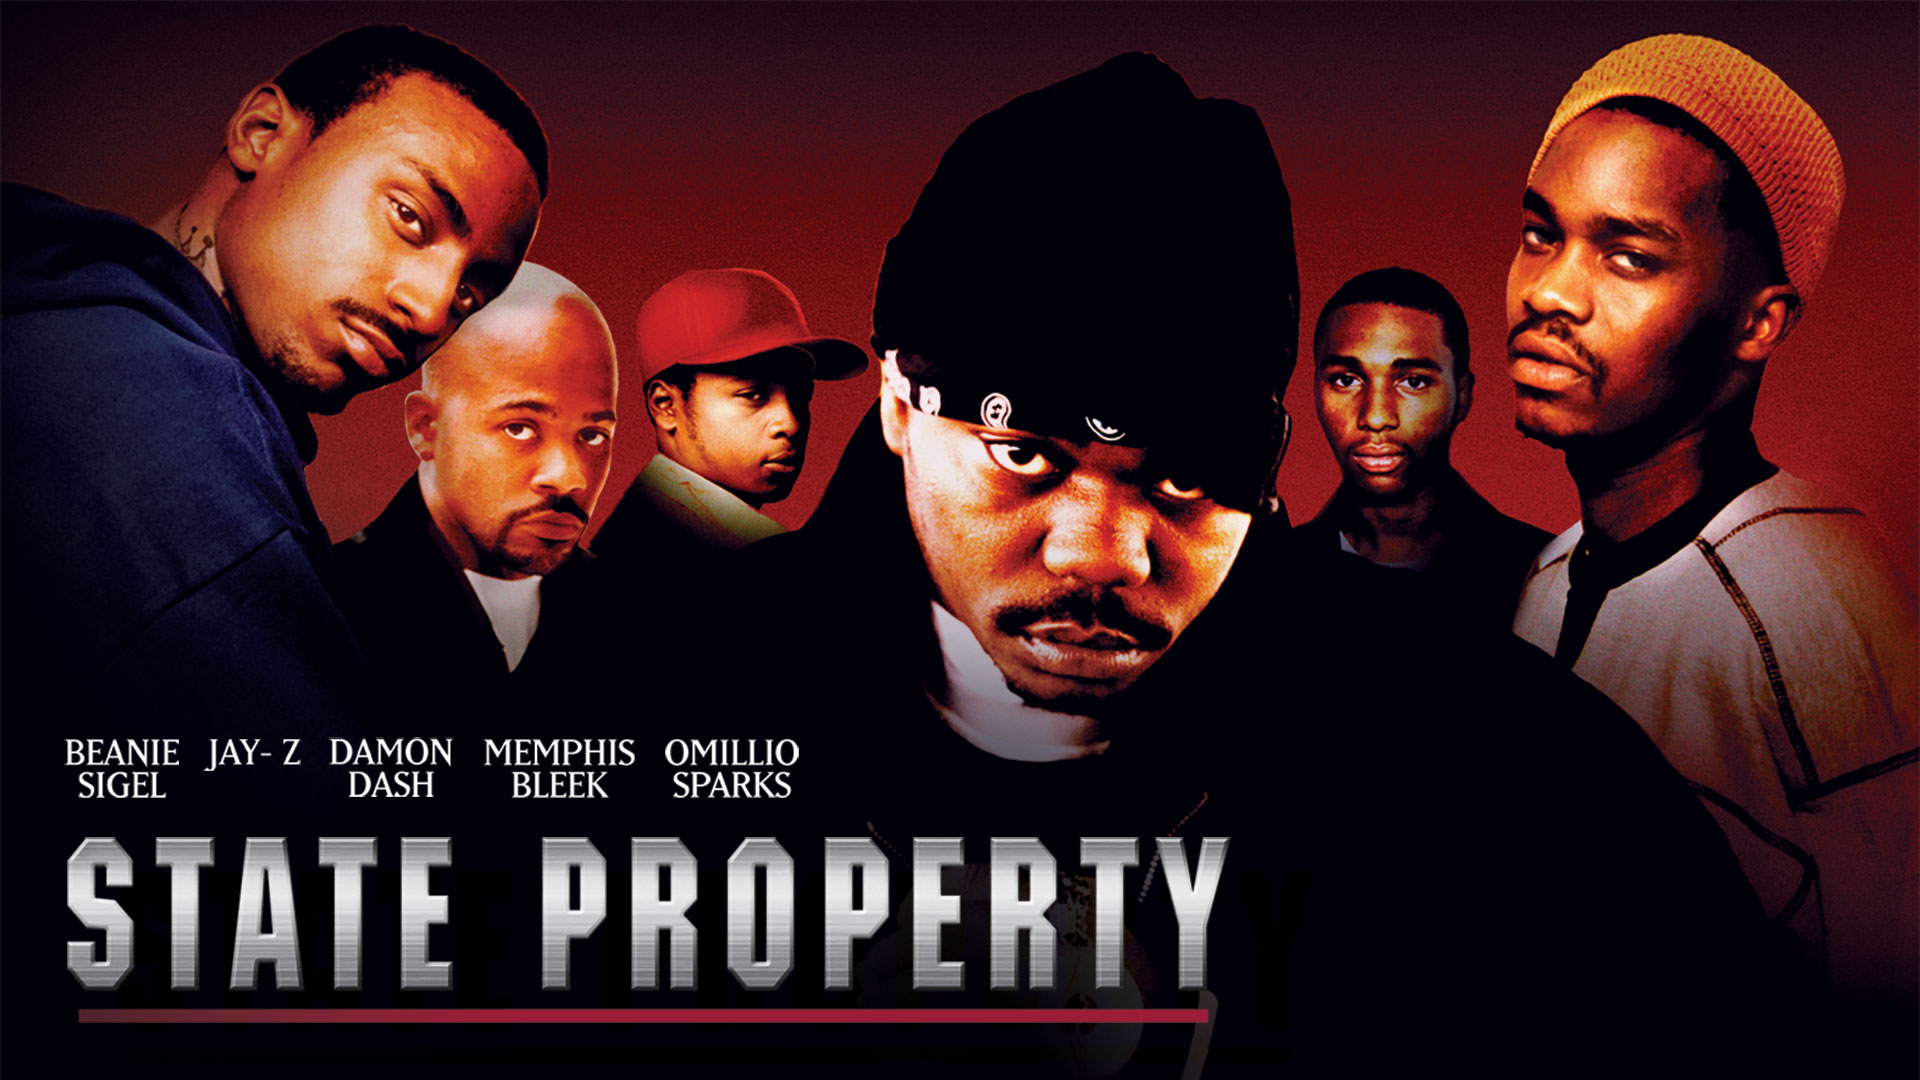 amanda zabel recommends watch state property full length movie pic